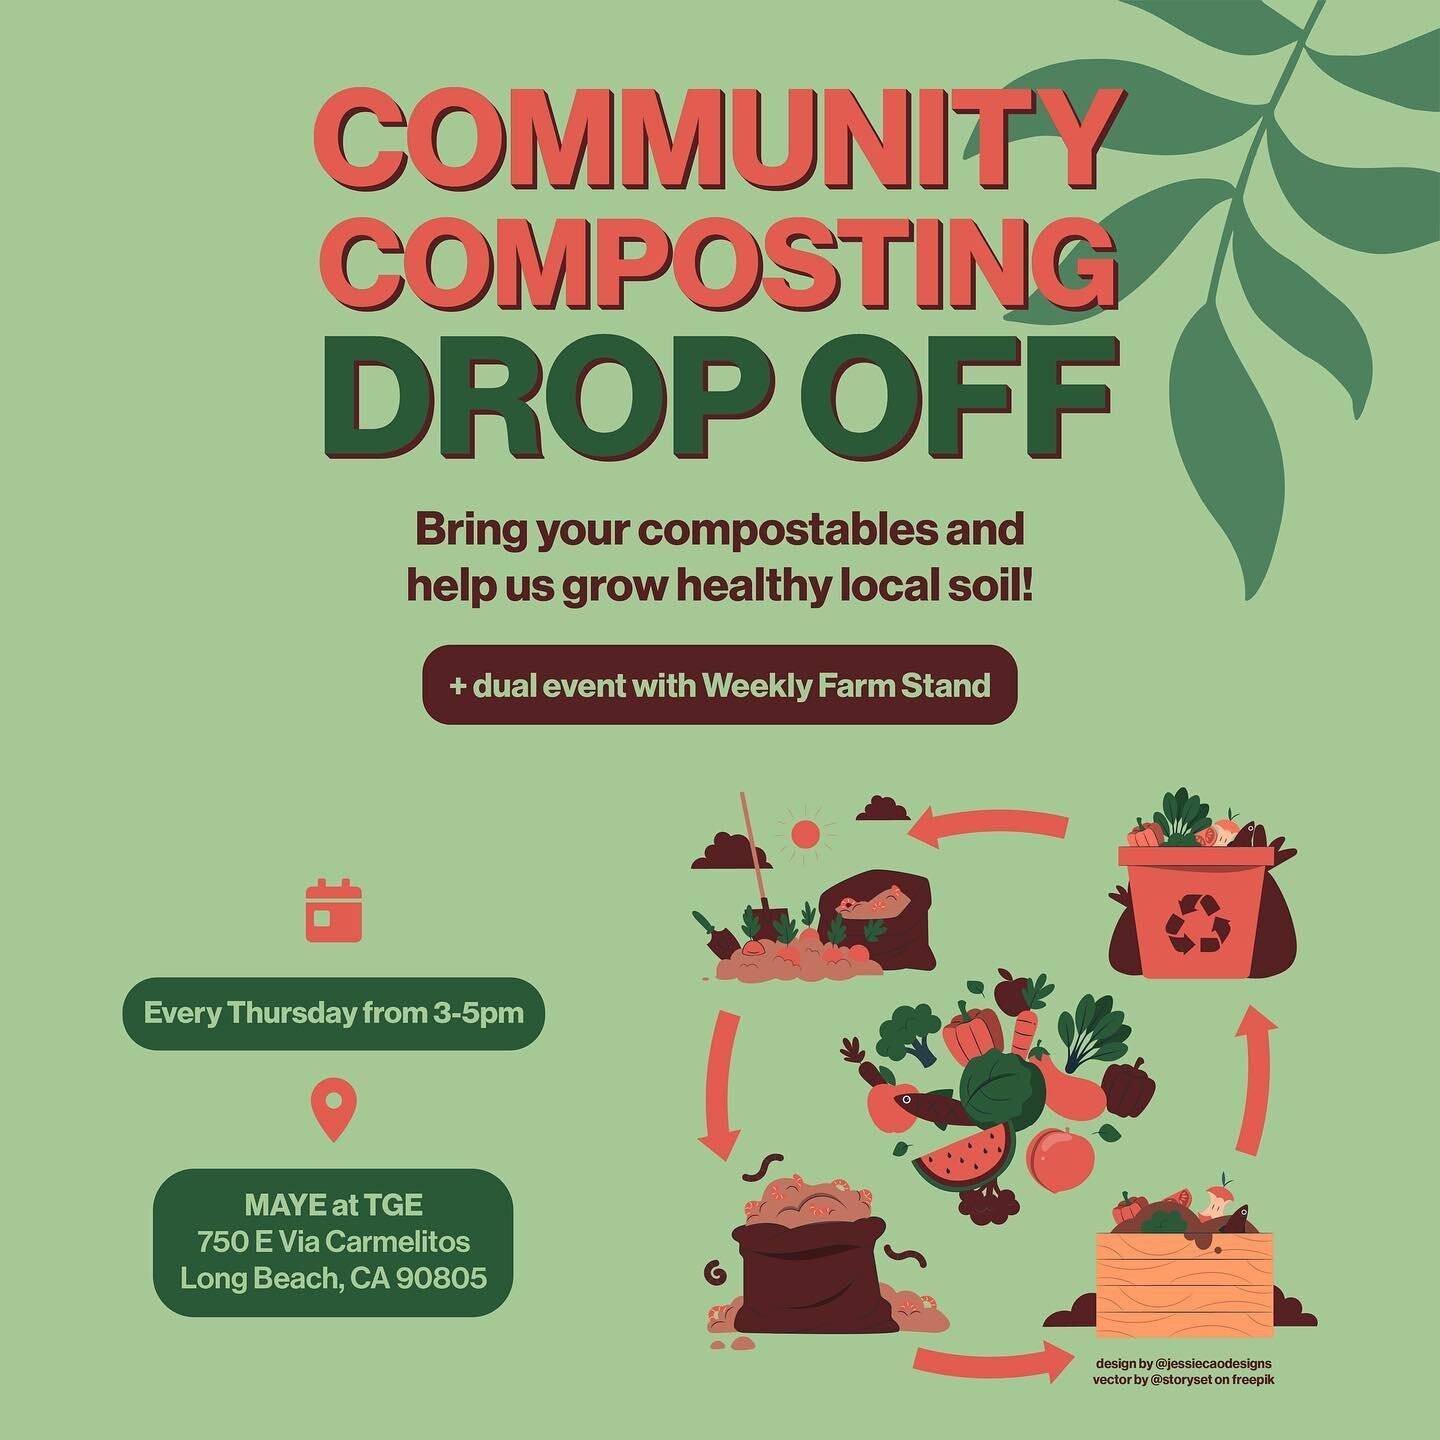 🌼 We are hosting a Community Composting Drop Off event every Thursday from 3-5pm at the Growing Experience Urban Farm! (📍750 E Via Carmelitos, Long Beach, CA 90805)

🍋 Bring your compostables and help us grow healthy local soil. Please refer to th